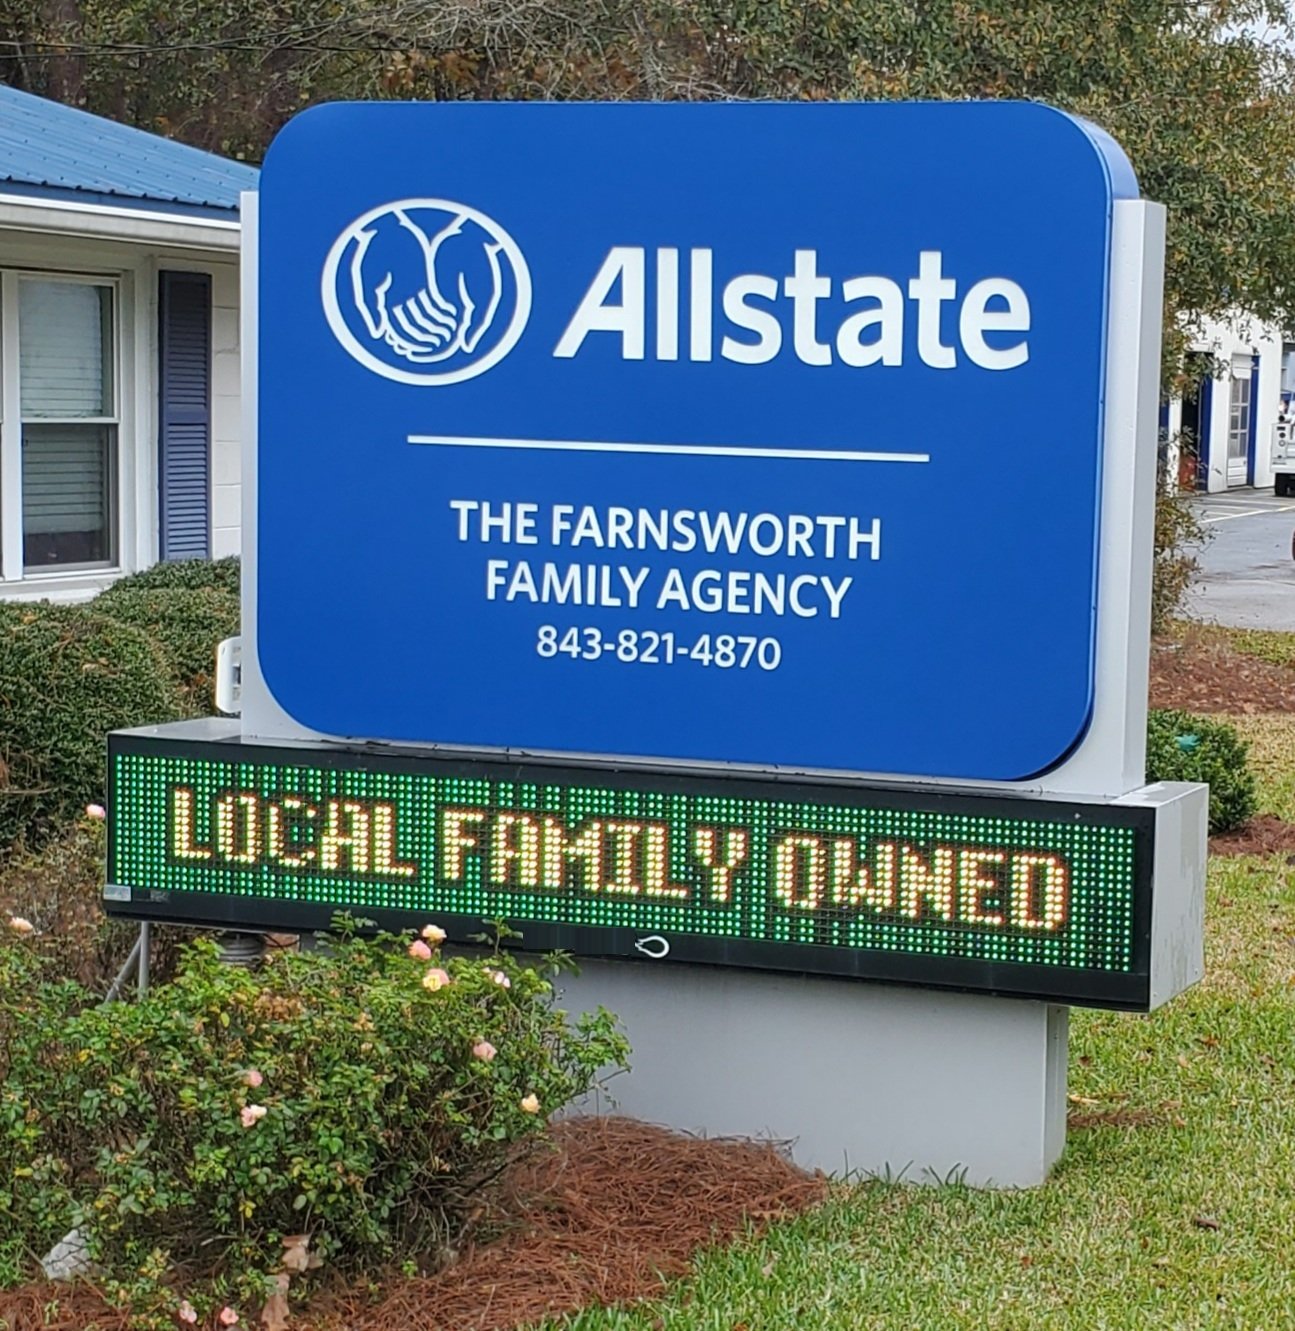 Auto Insurance Quotes in Summerville, SC The Farnsworth Family Agency Allstate